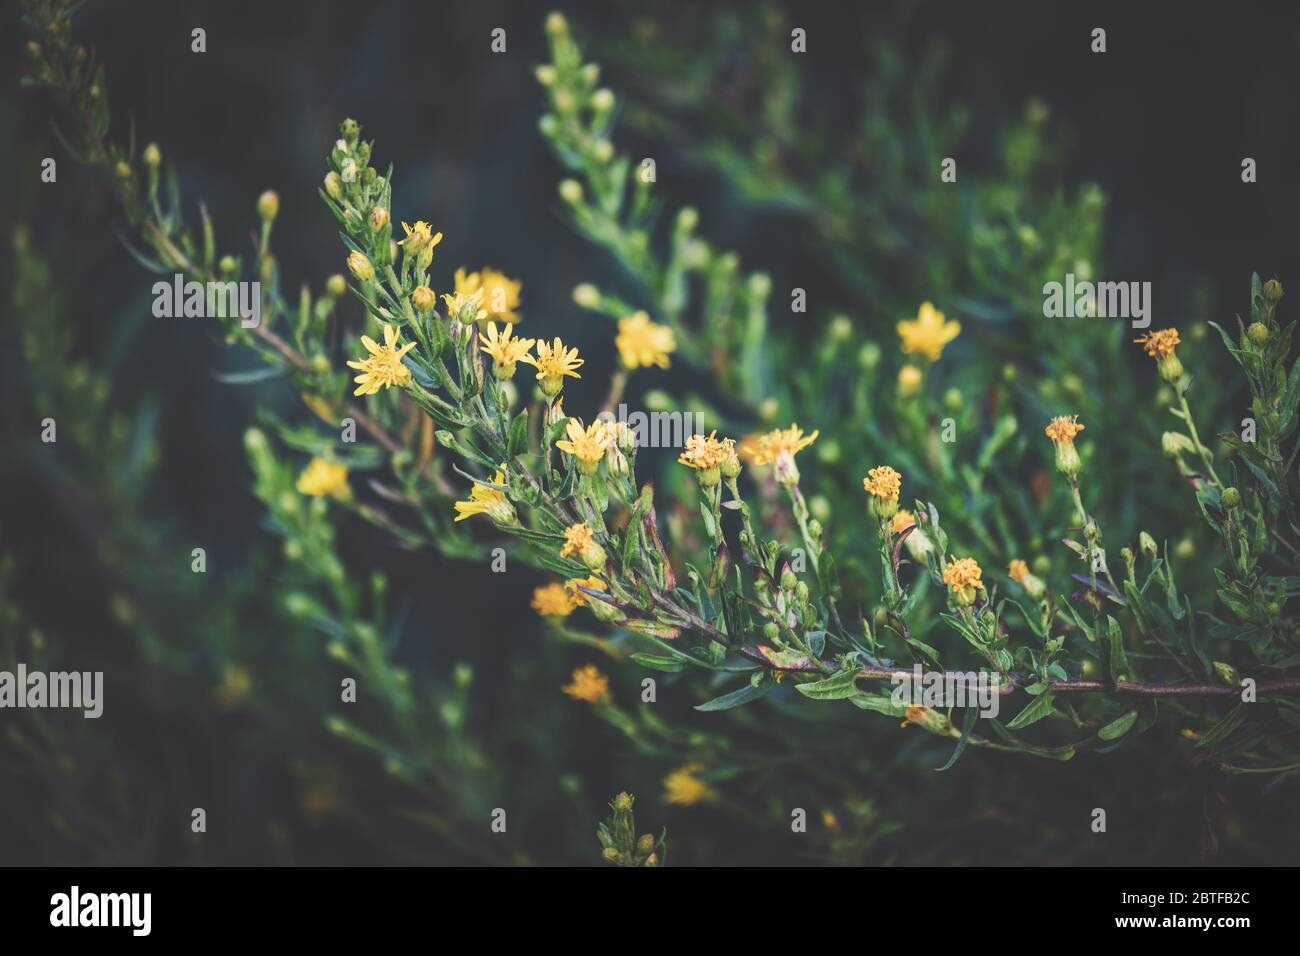 Detail of thin branches with small yellow flowers Stock Photo